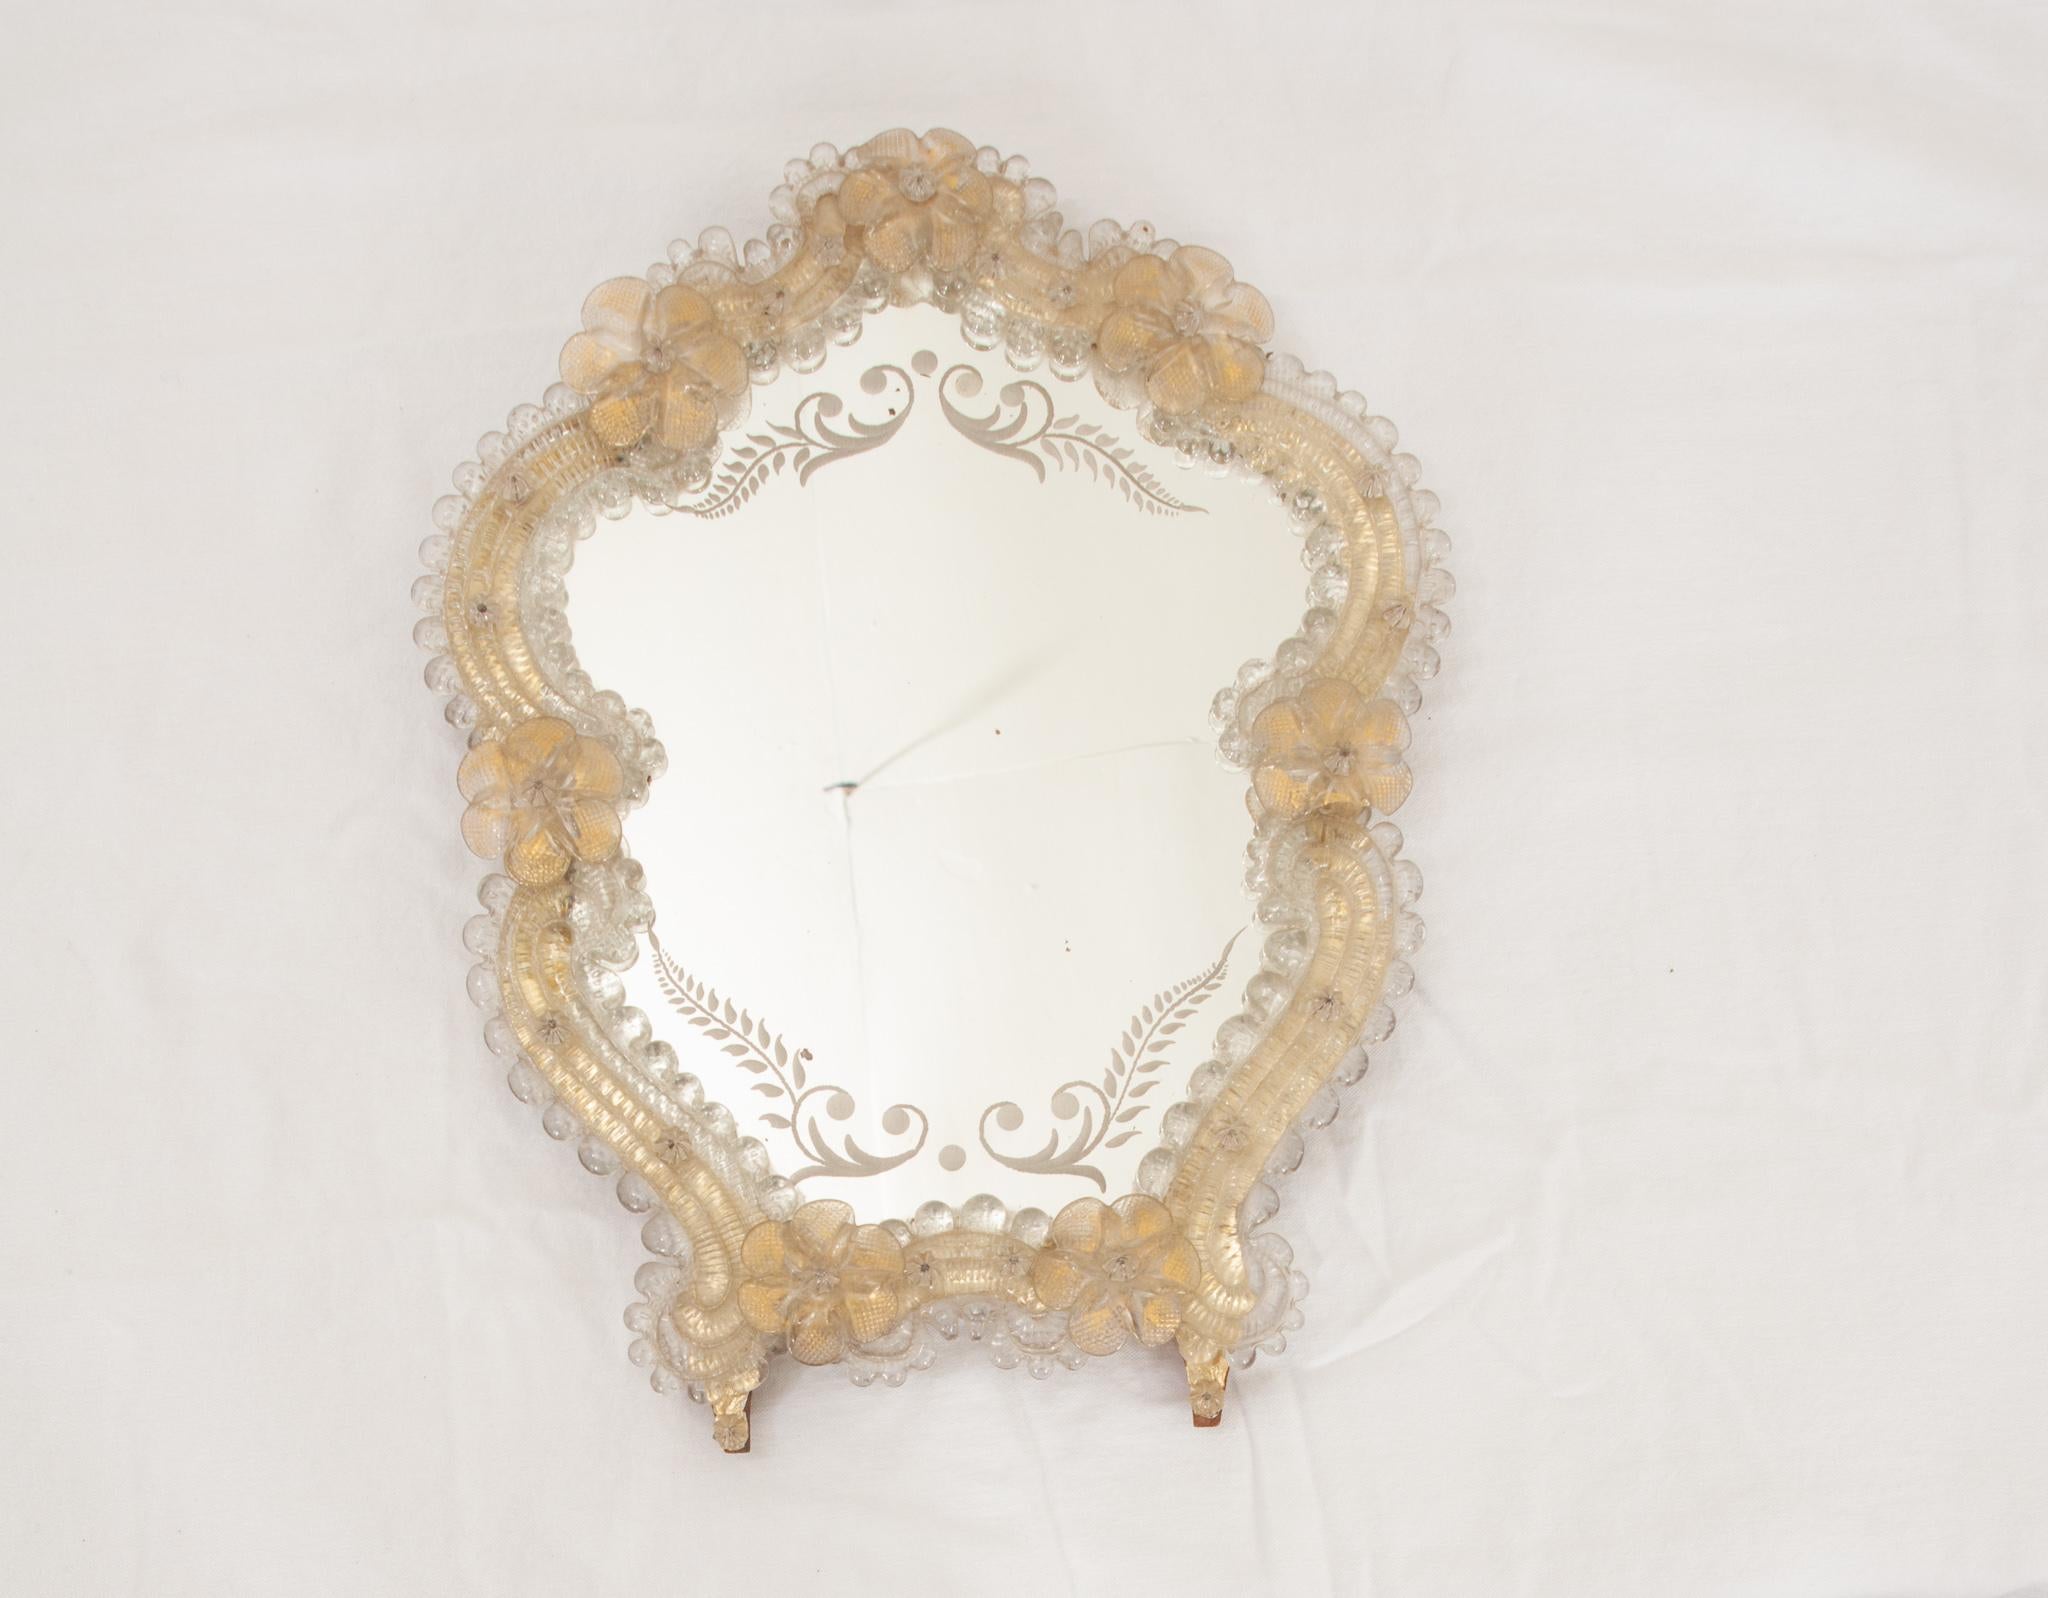 This diminutive mirror is a fabulous addition to any space. The antique mirror plate features beautiful fern inspired etchings on the top and bottom. Glass flowers dusted with gold gilt on their underside give off an glowing look. Fixed on a